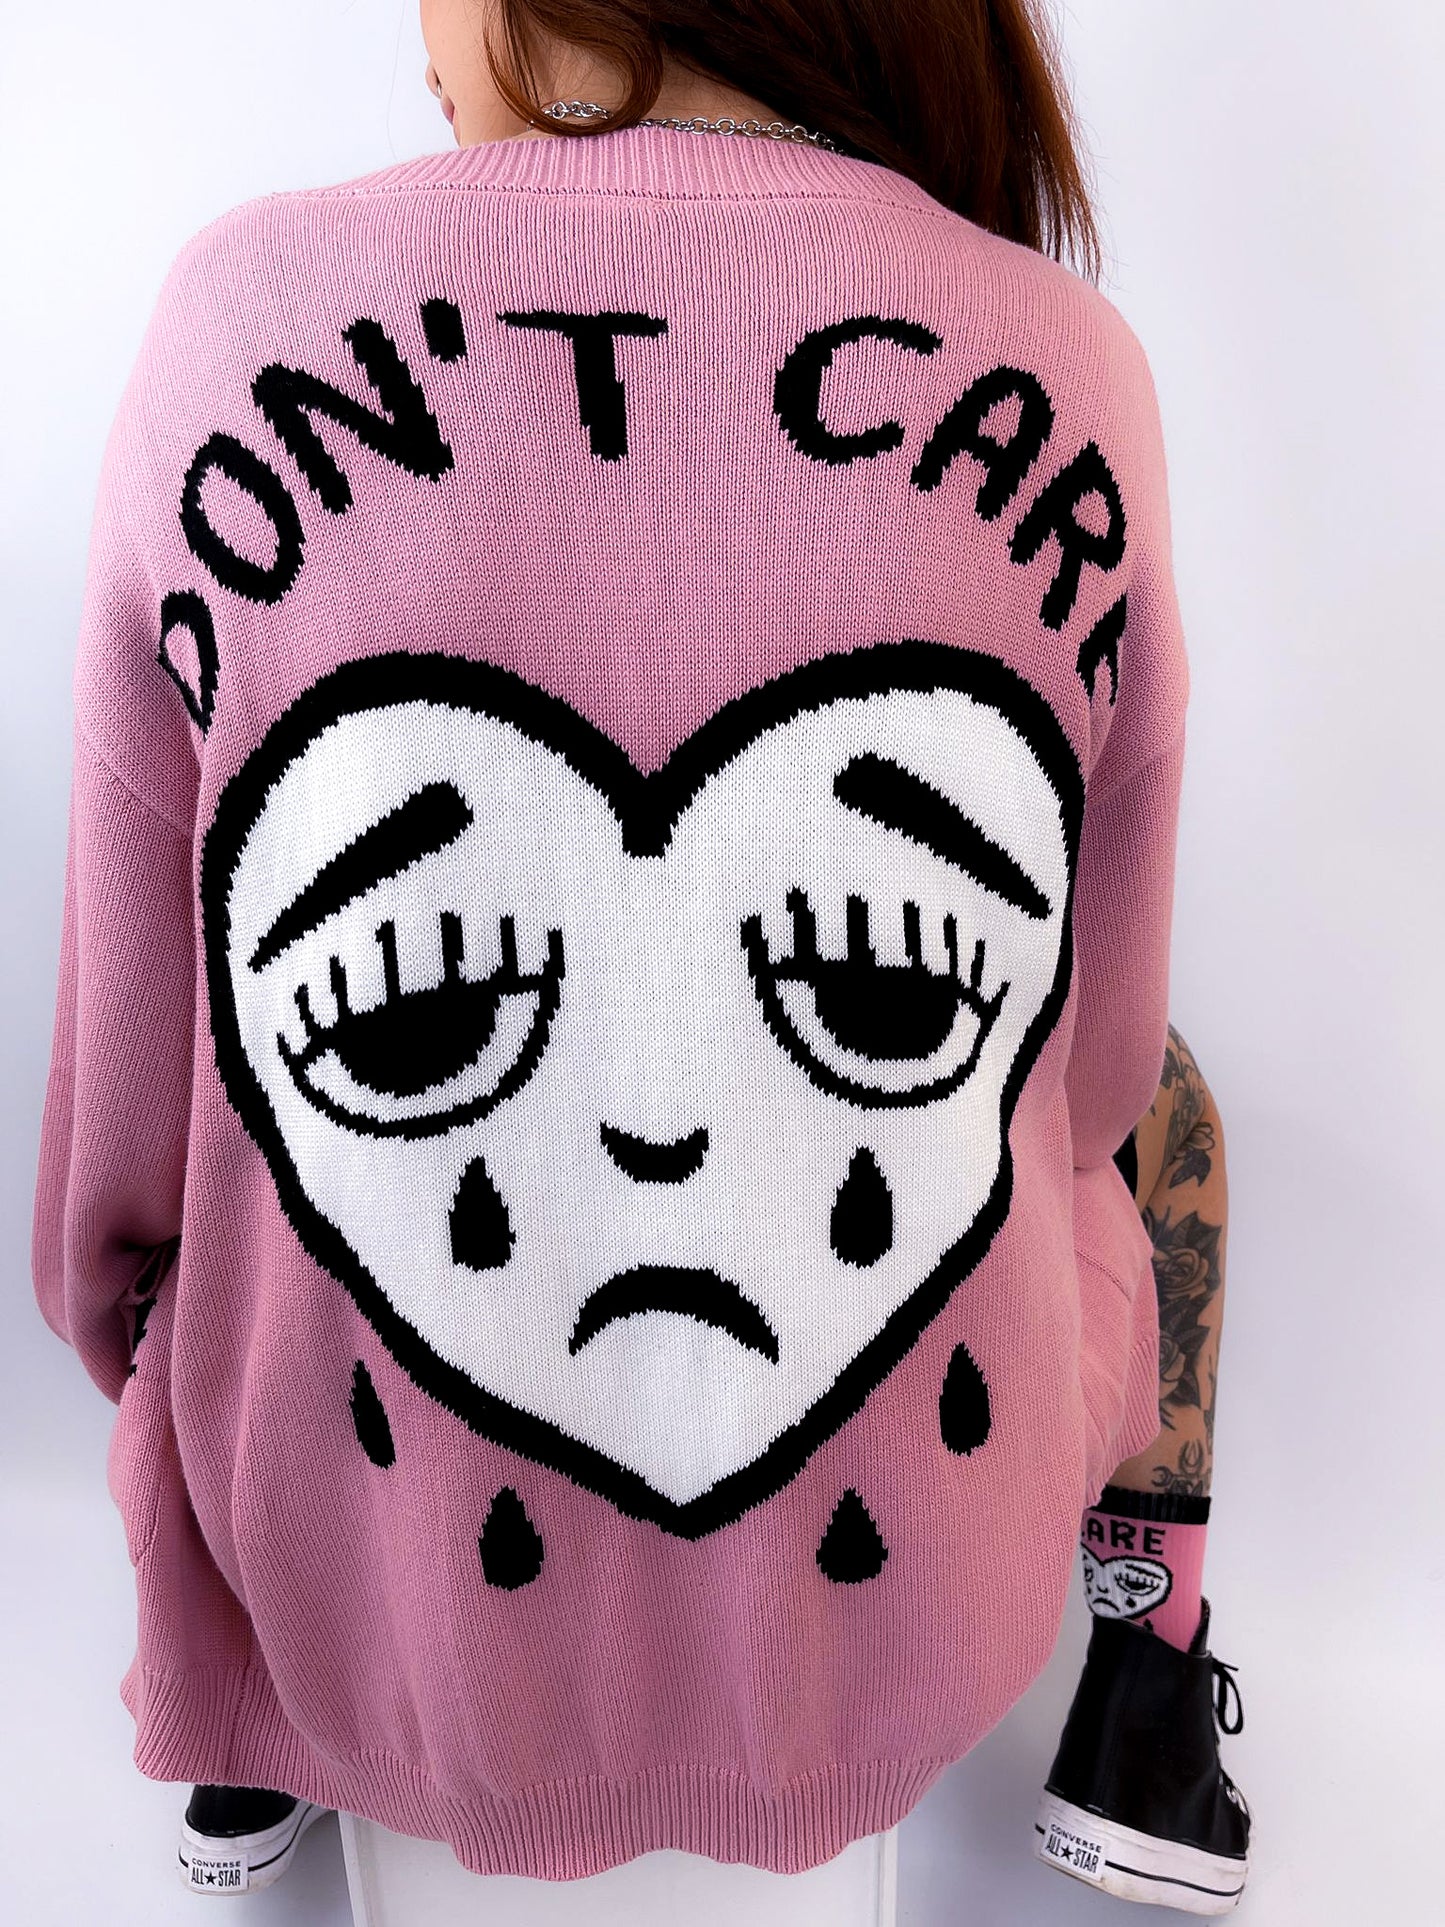 ADULT DON’T CARE PINK KNITTED CARDIGAN